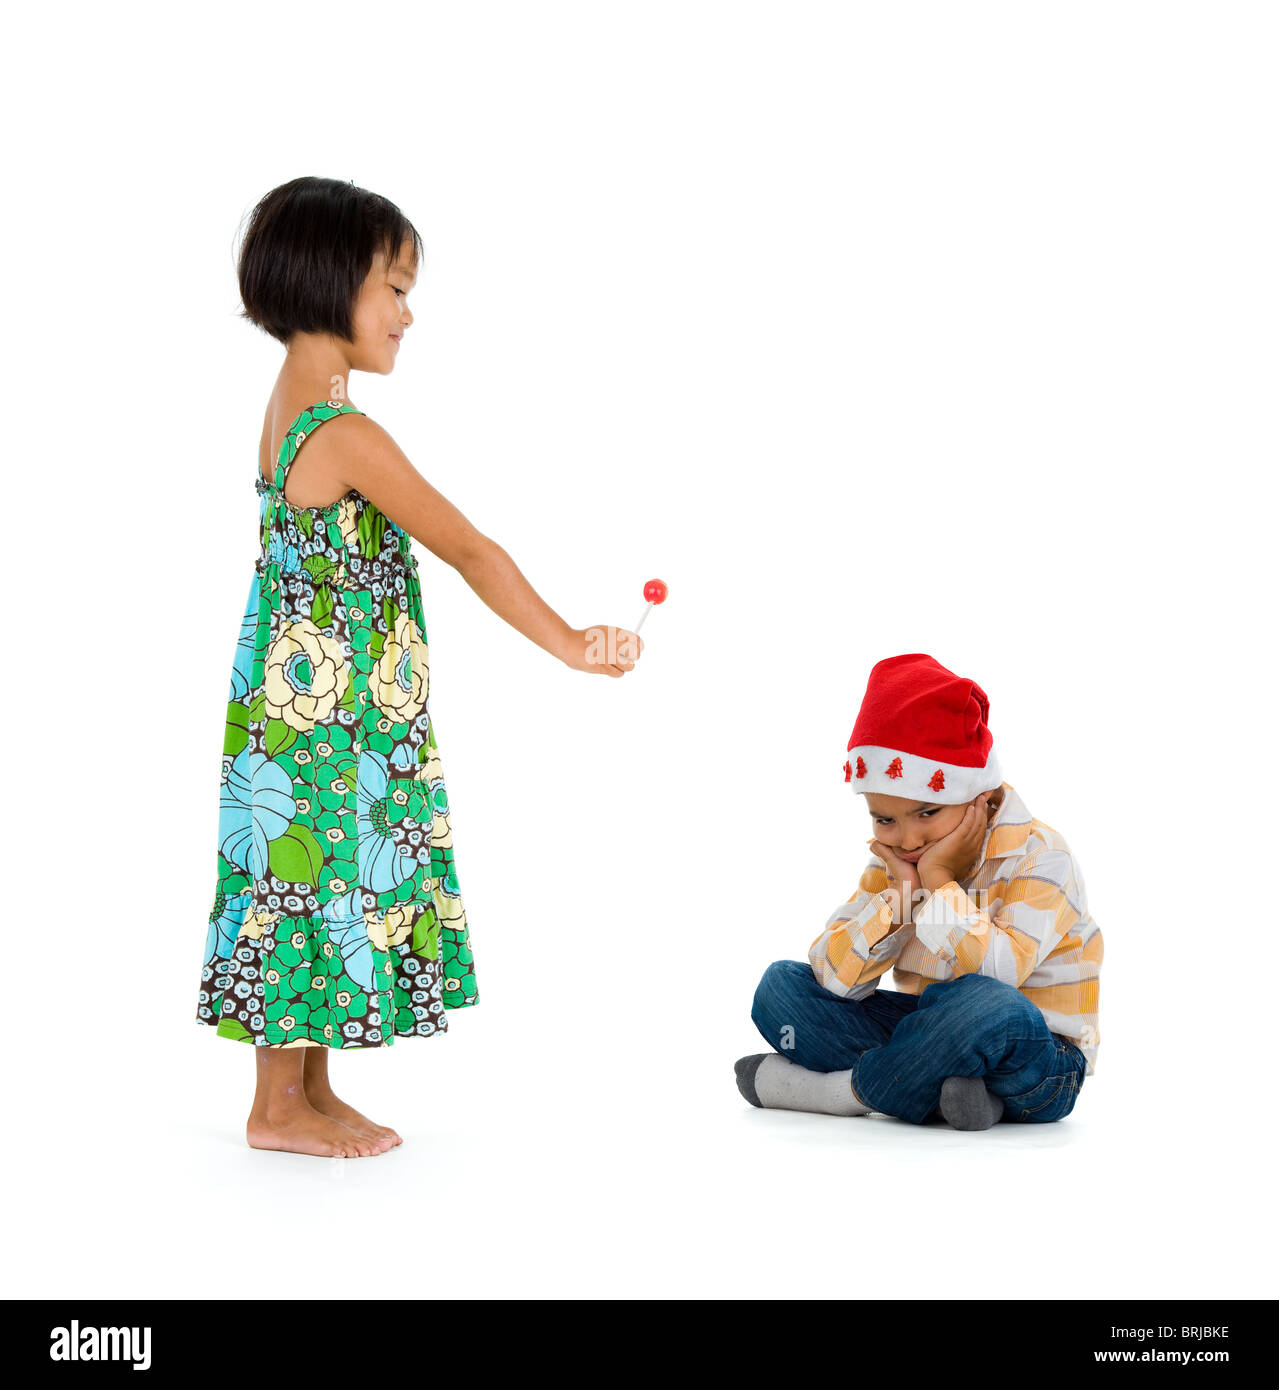 a little girl giving her friend a lollipop for christmas. they boy doesn't appreciate it at all. isolate on white background. Stock Photo